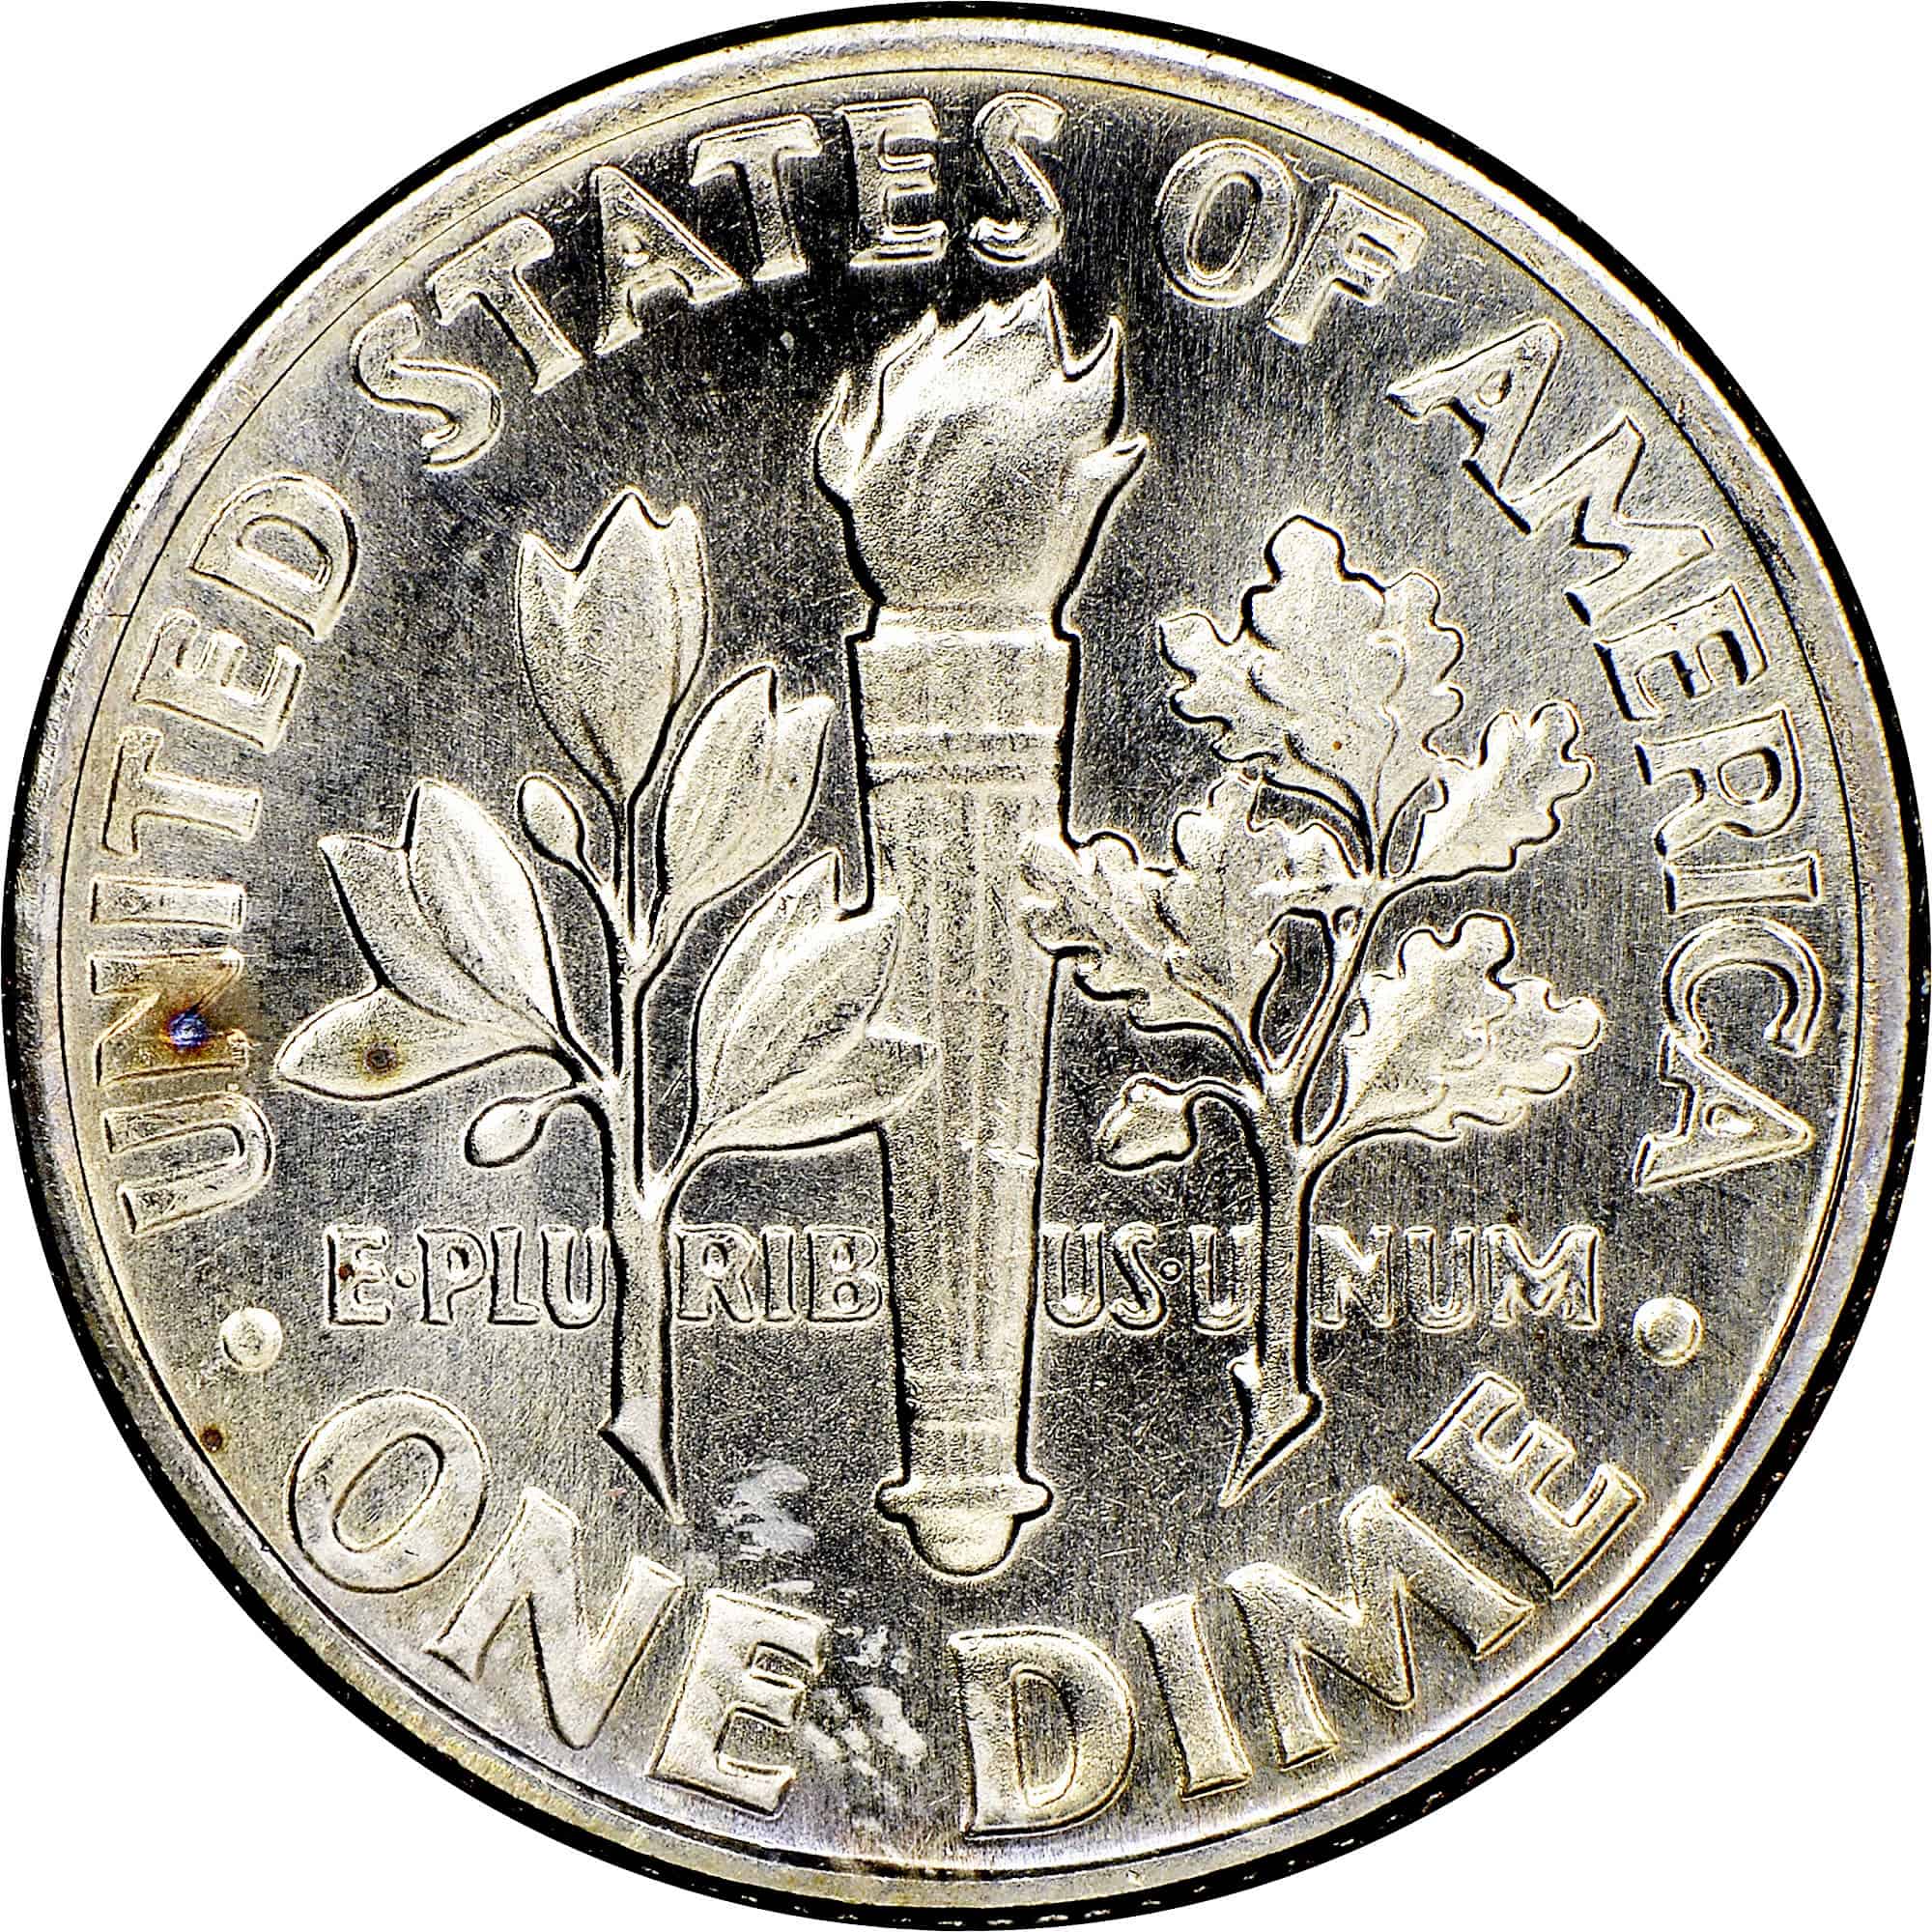 The Reverse of the 1968 Dime